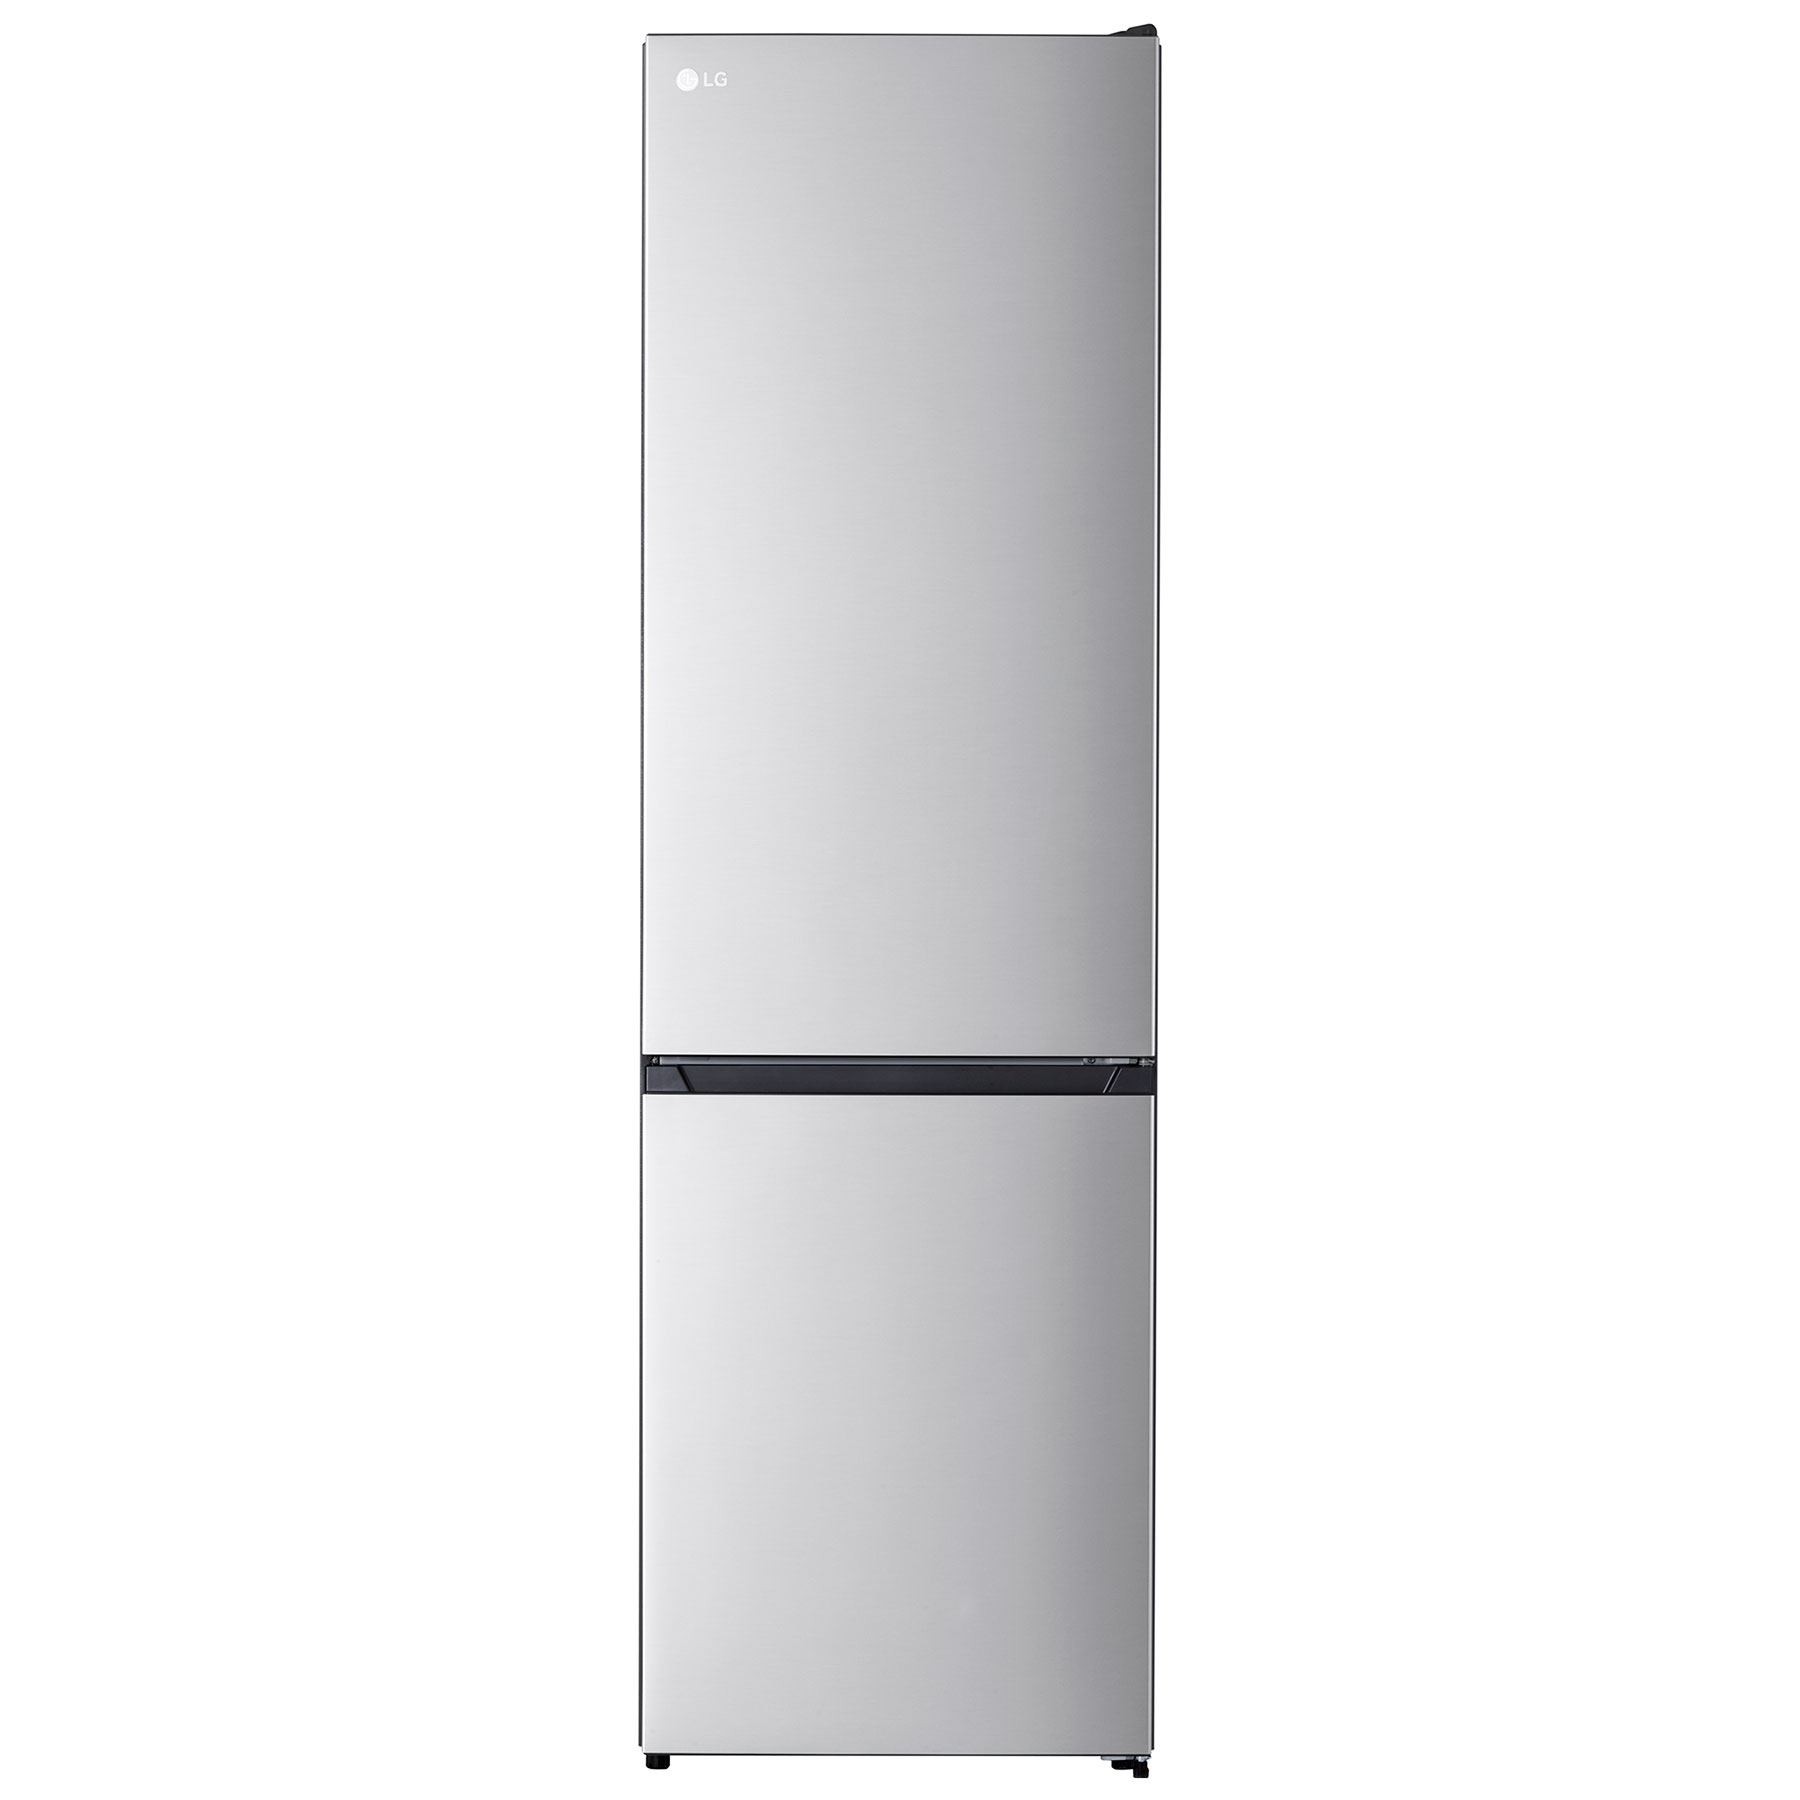 LG GBM22HSADH 60cm Frost Free Fridge Freezer in Silver 2 00m D Rated